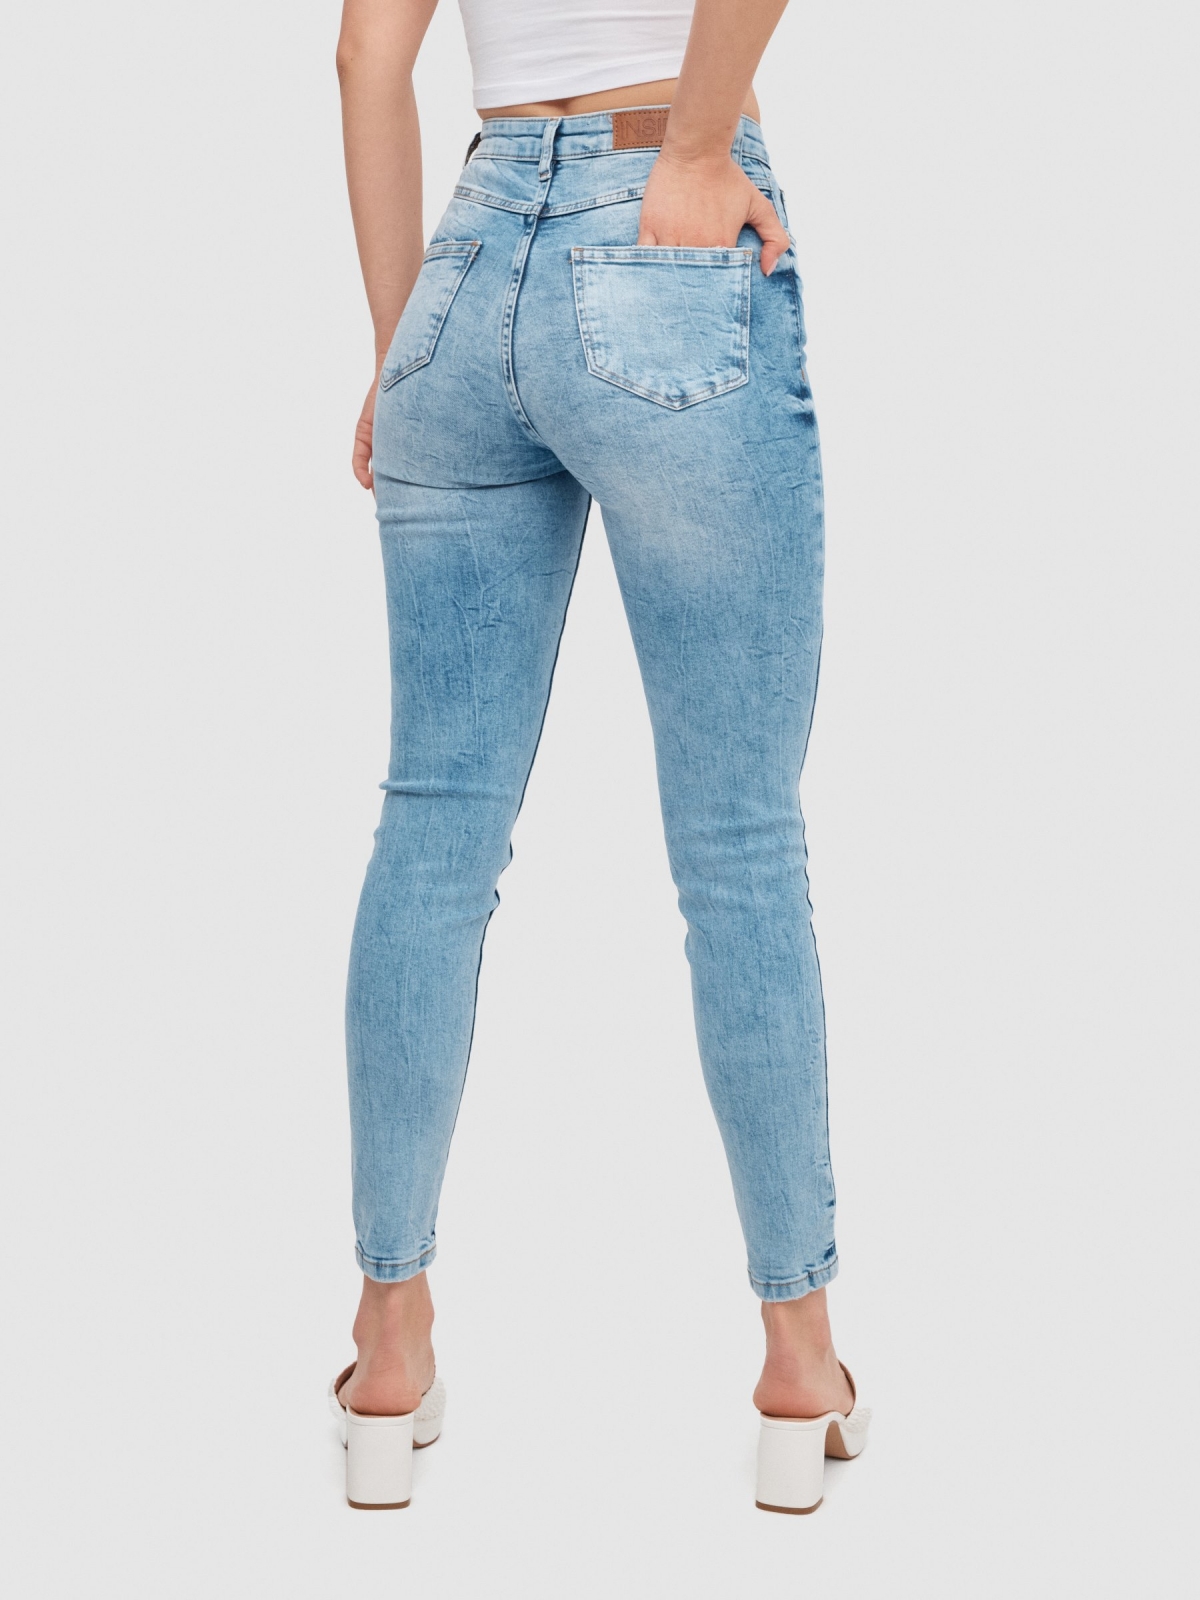 Mid-rise skinny jeans blue middle back view